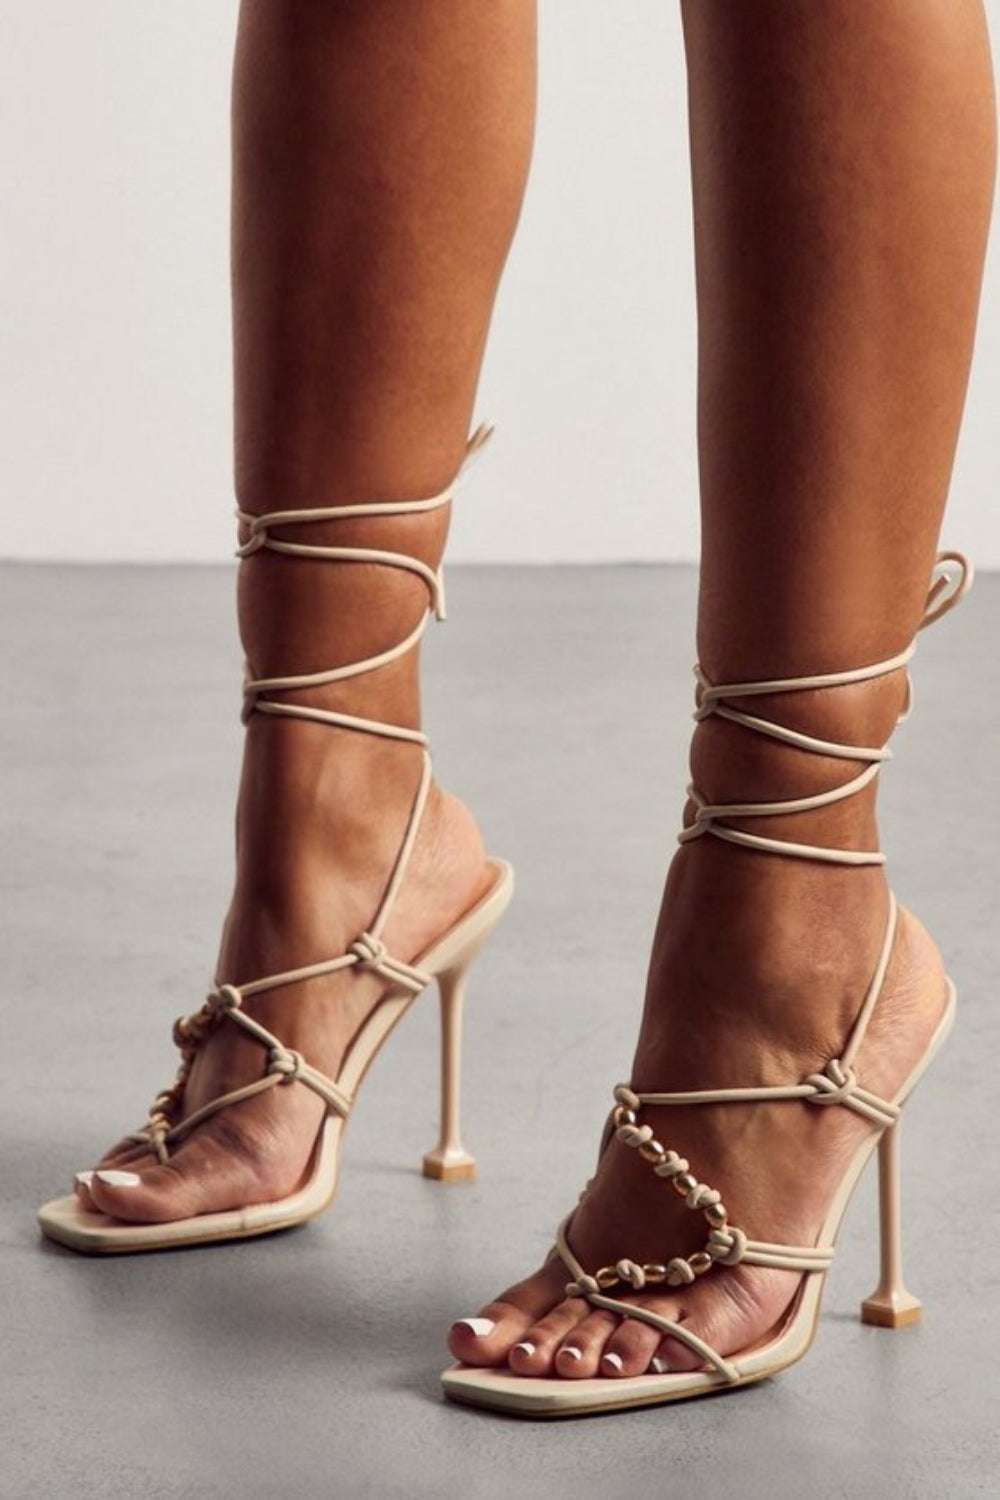 CREAM LIZARD STRAPPY HIGH HEELS WITH LACE UP – ARRK FASHION